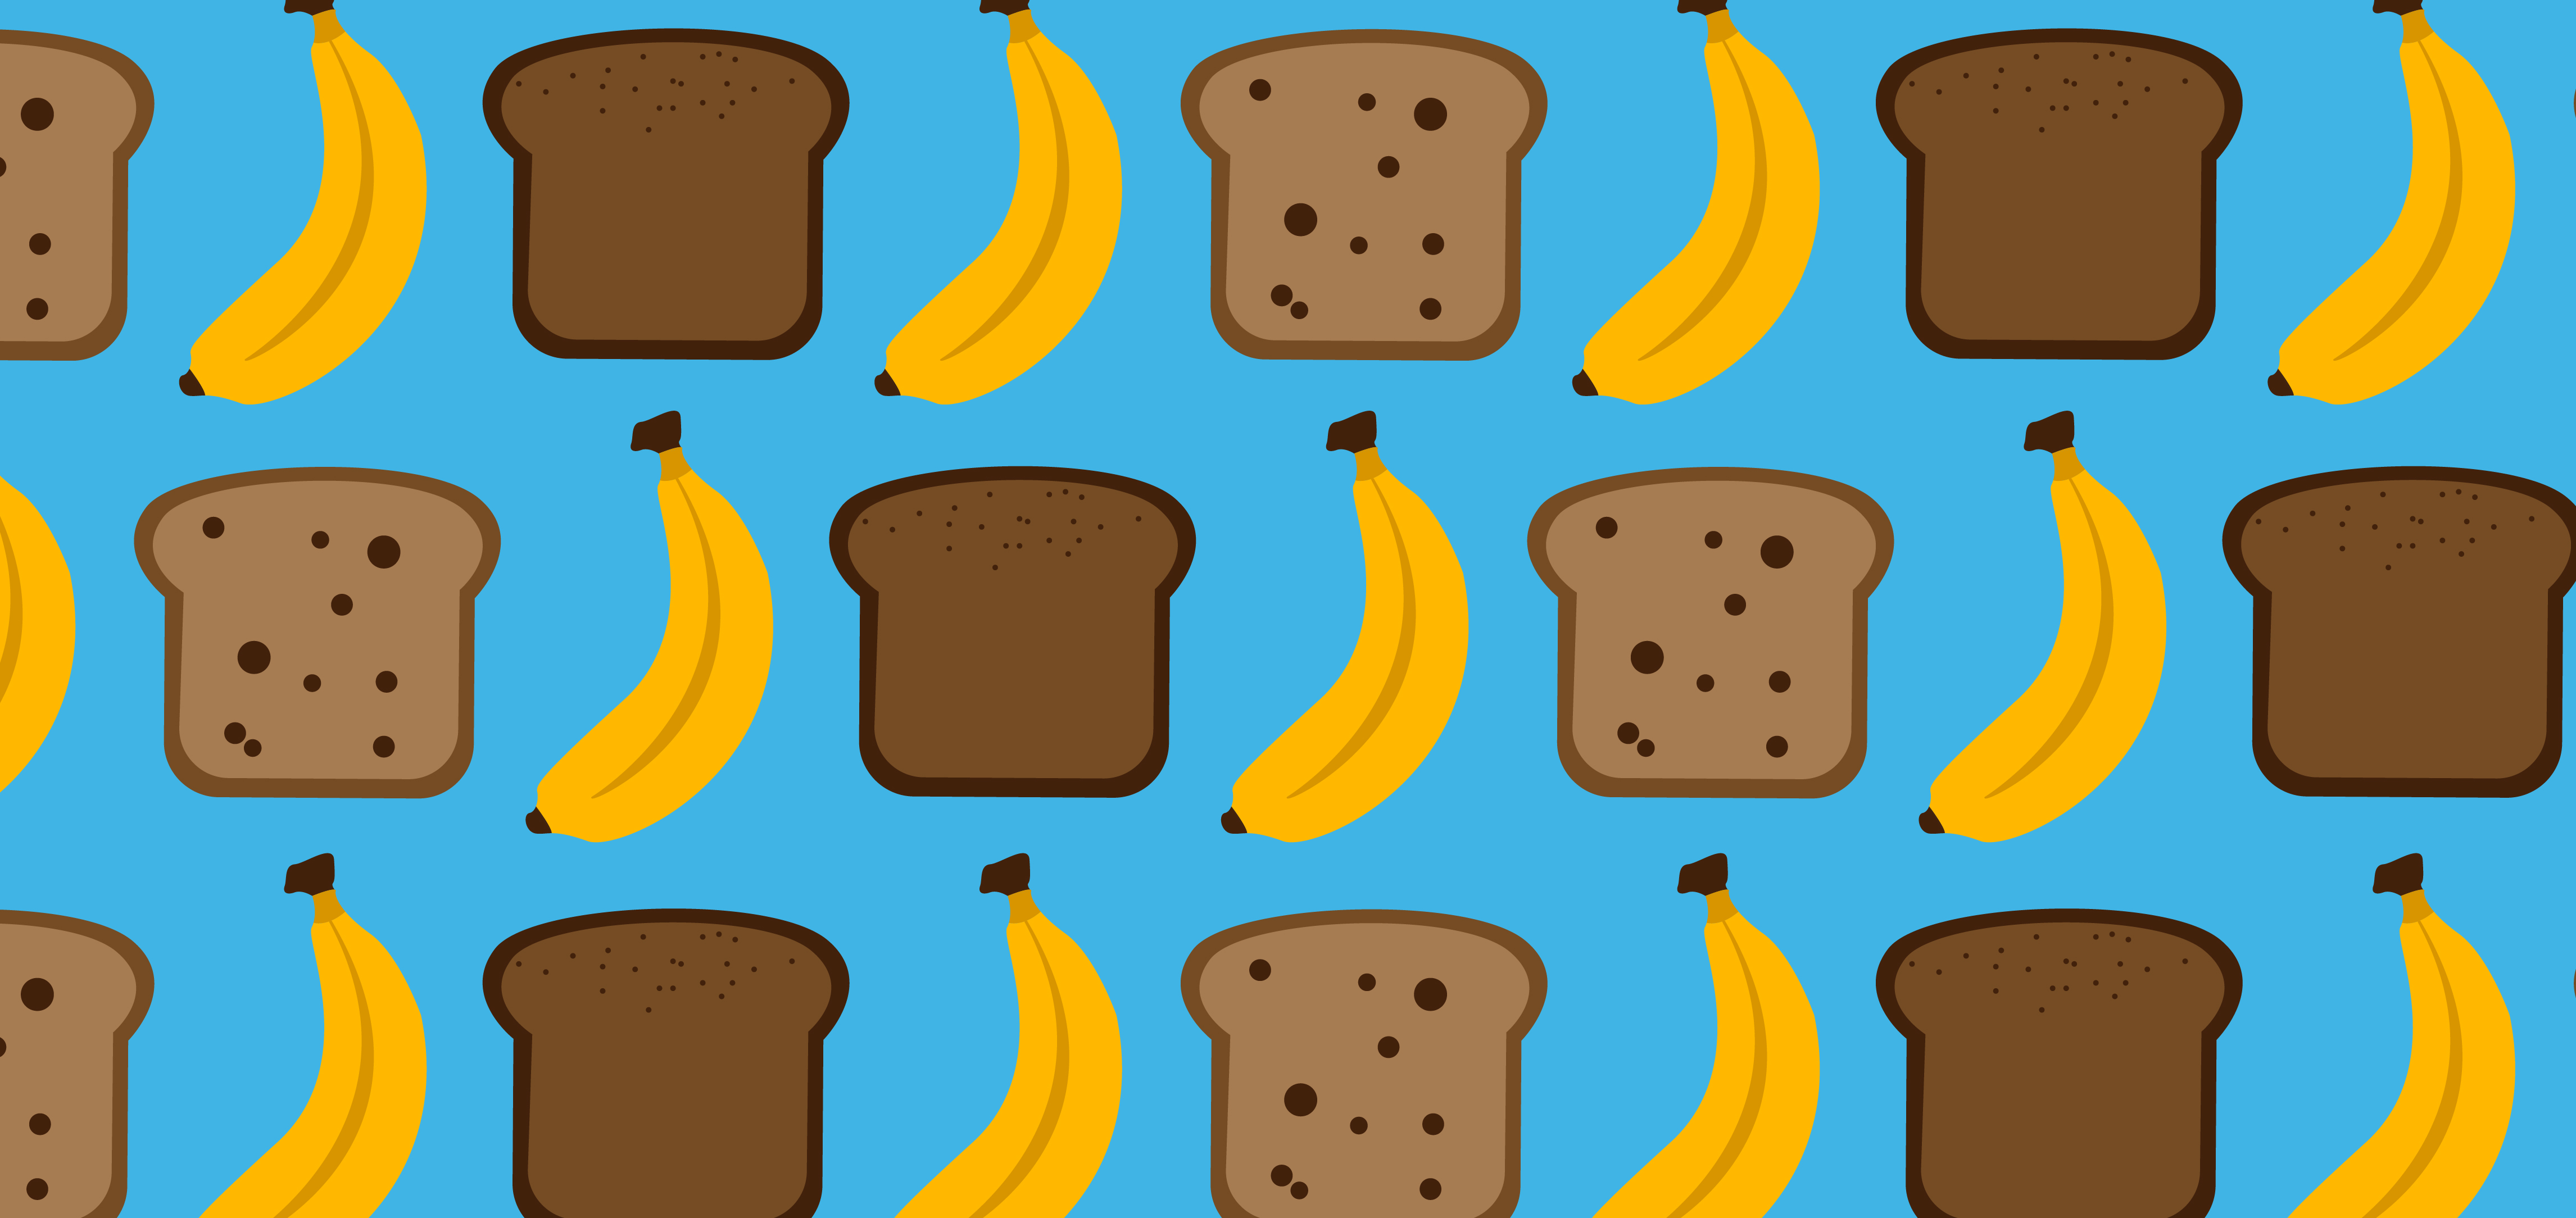 Banana Loaf Clipart : Free for commercial use no attribution required high ...